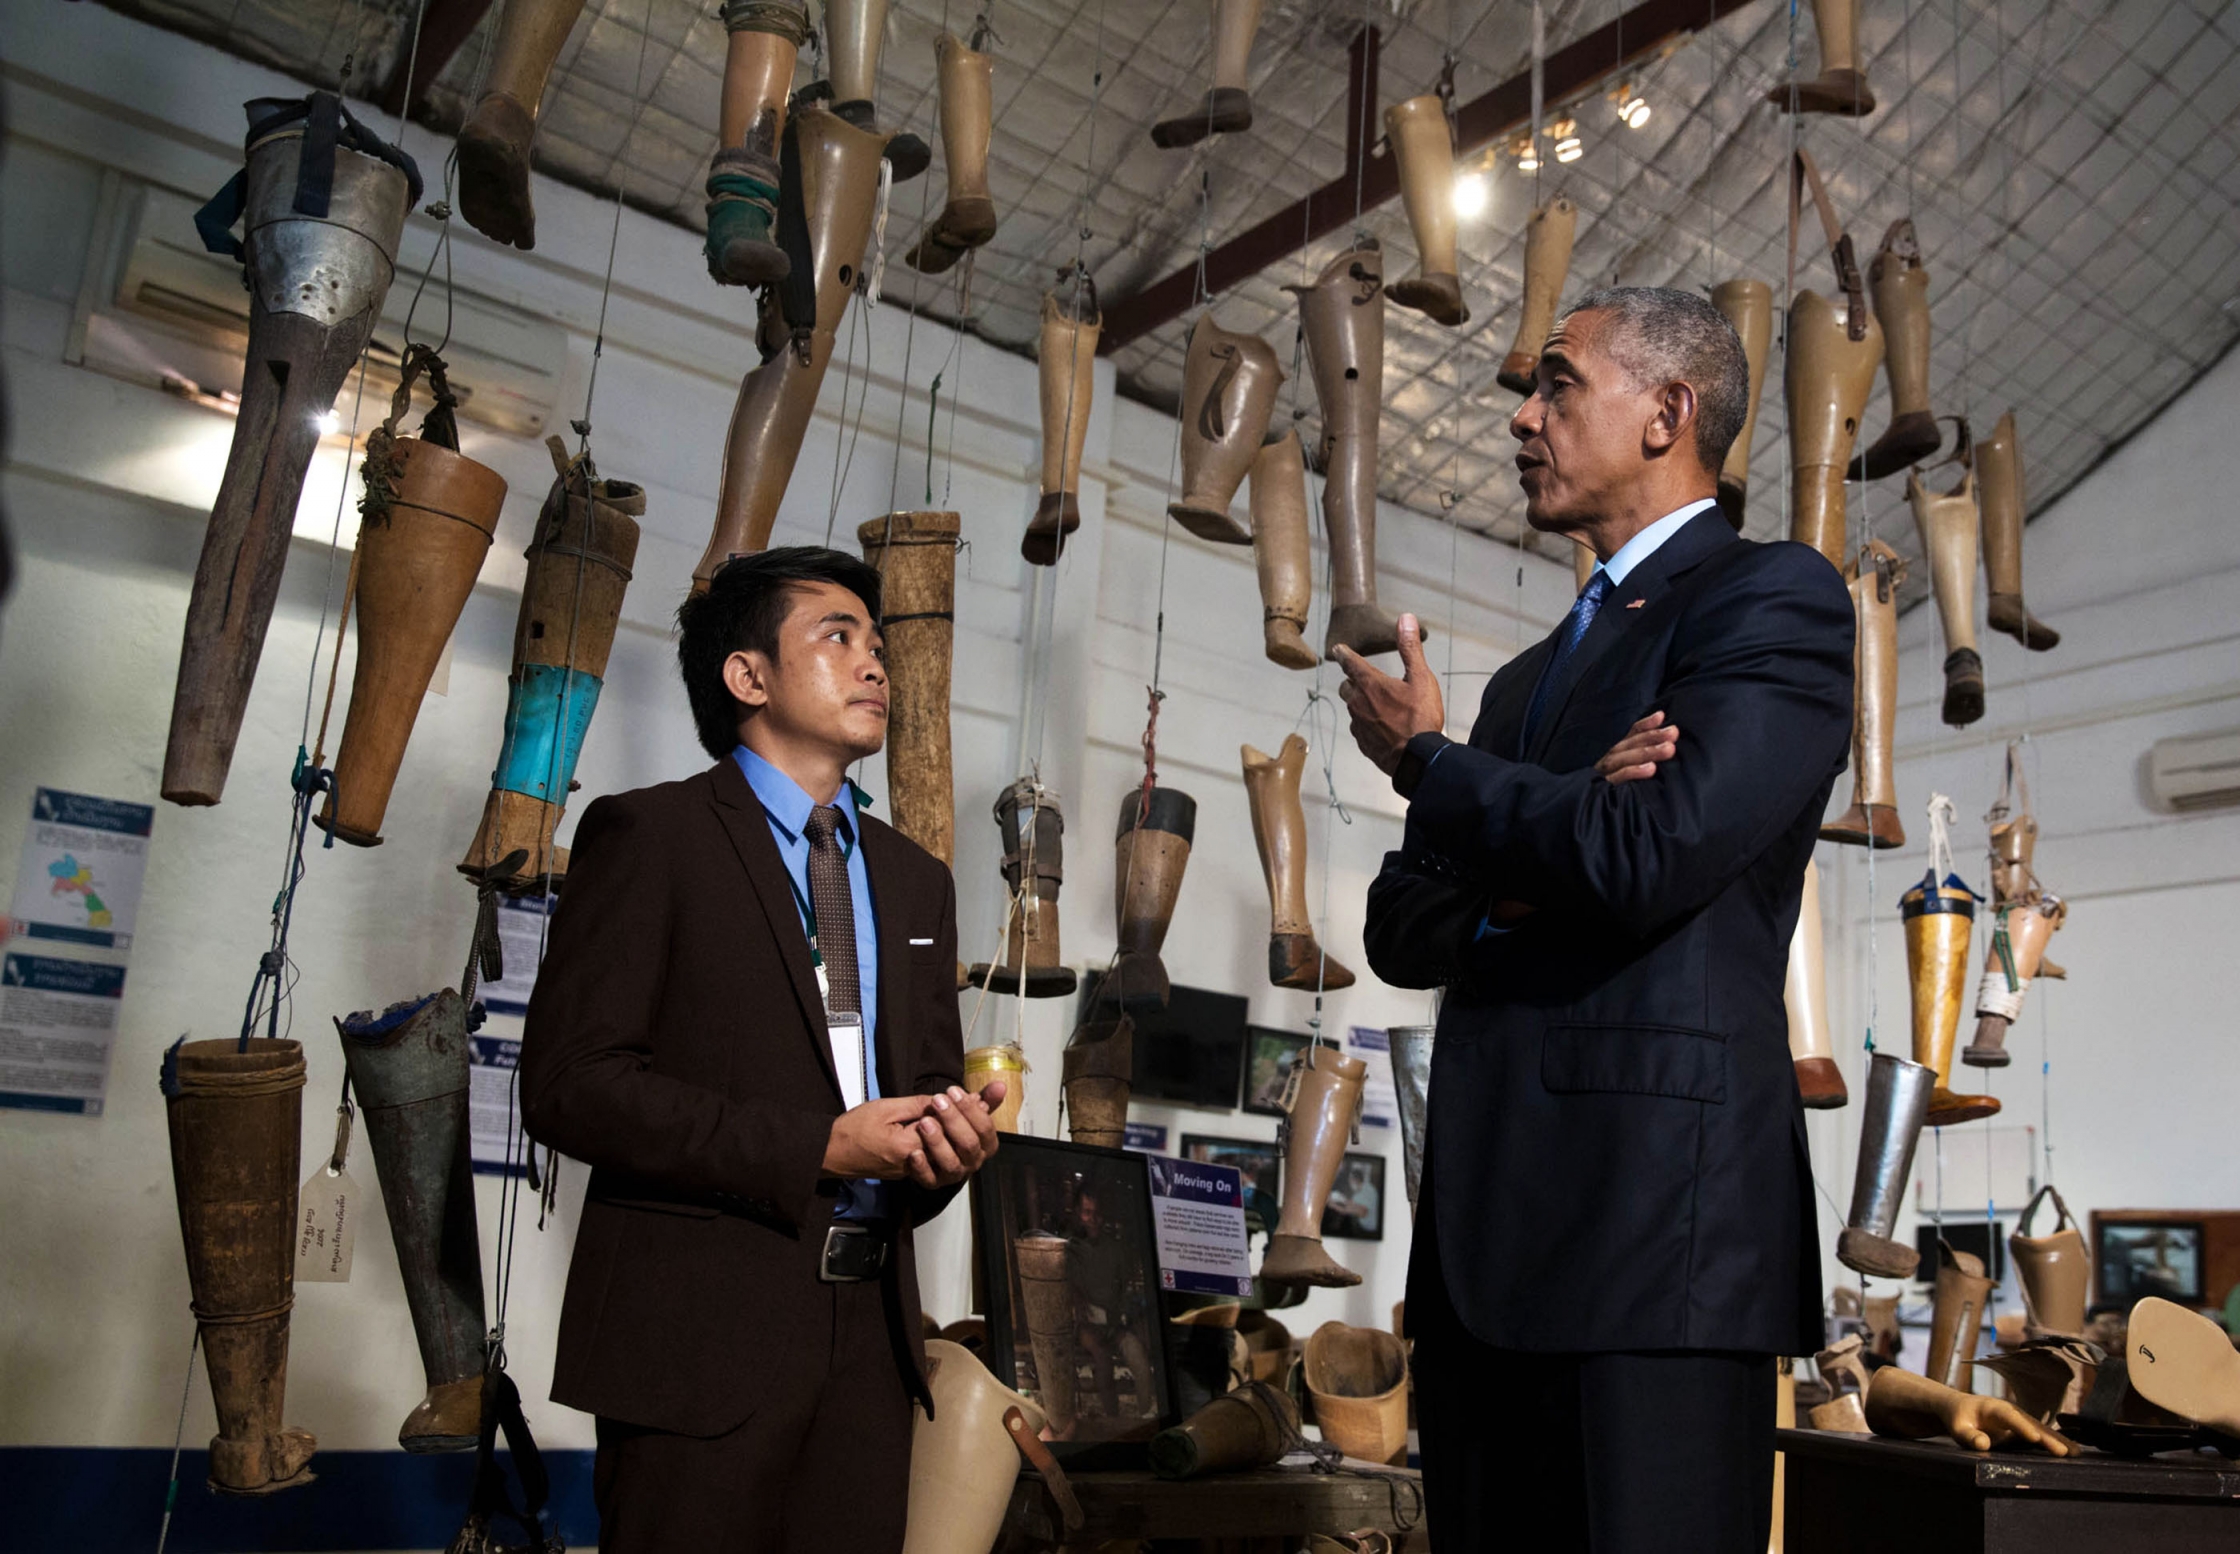 President Barack Obama meets with unexploded ordnance survivor Thoummy Silamphan from the Quality of Life Association, as he tours the Cooperative Orthotic Prosthetic Enterprise (COPE) Visitor Centre to meet with unexploded ordnance clearance teams and survivors of blasts, in Vientiane, Laos, Sept. 7, 2016. (Official White House Photo by Chuck Kennedy)